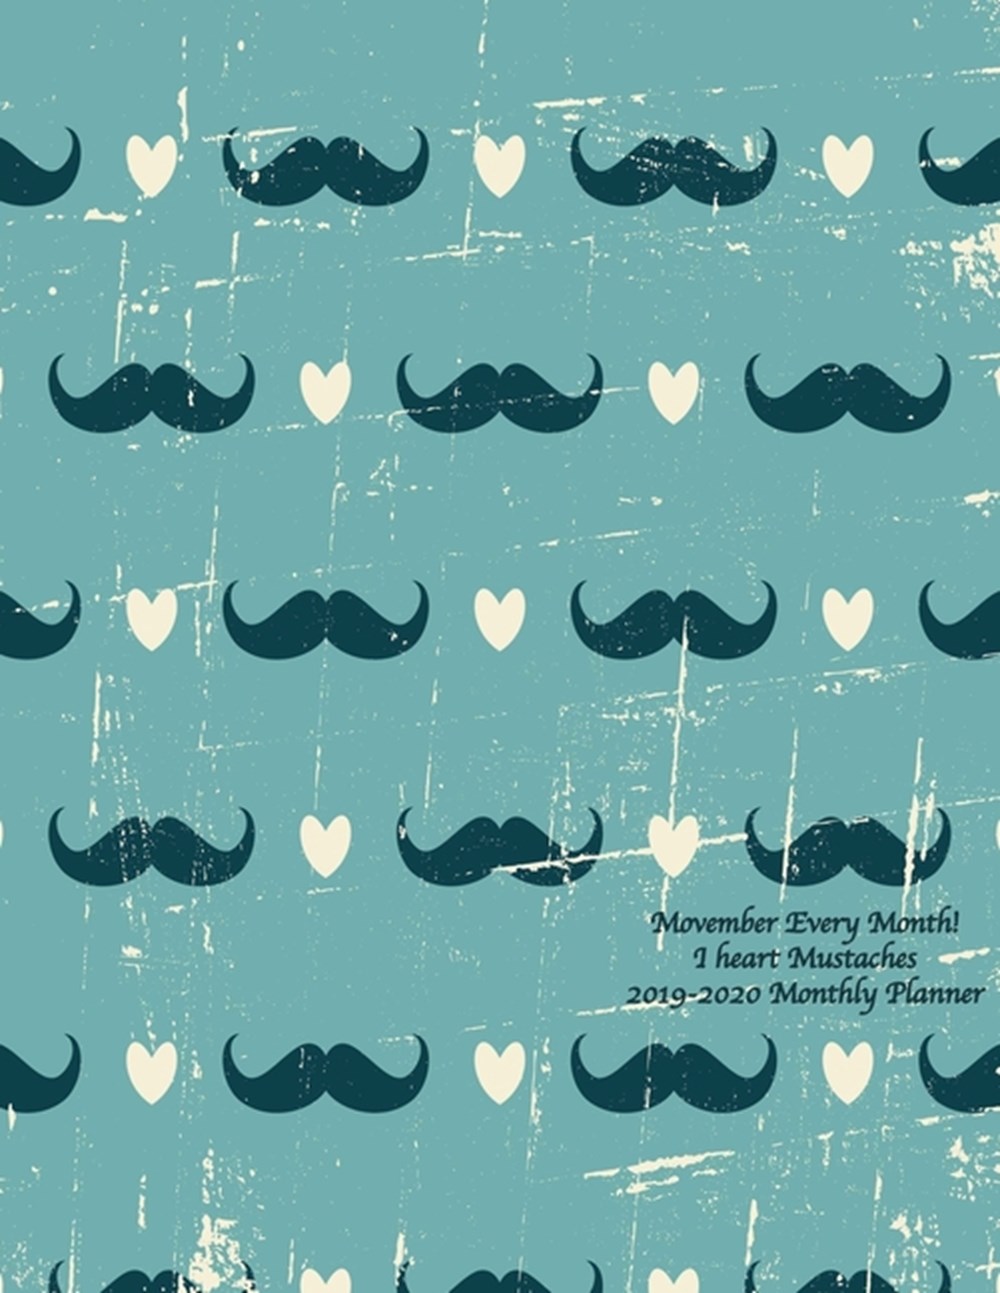 Movember Every Month! I heart Mustaches 2019-2020 Monthly Planner July 2019 To December 2020 Calenda